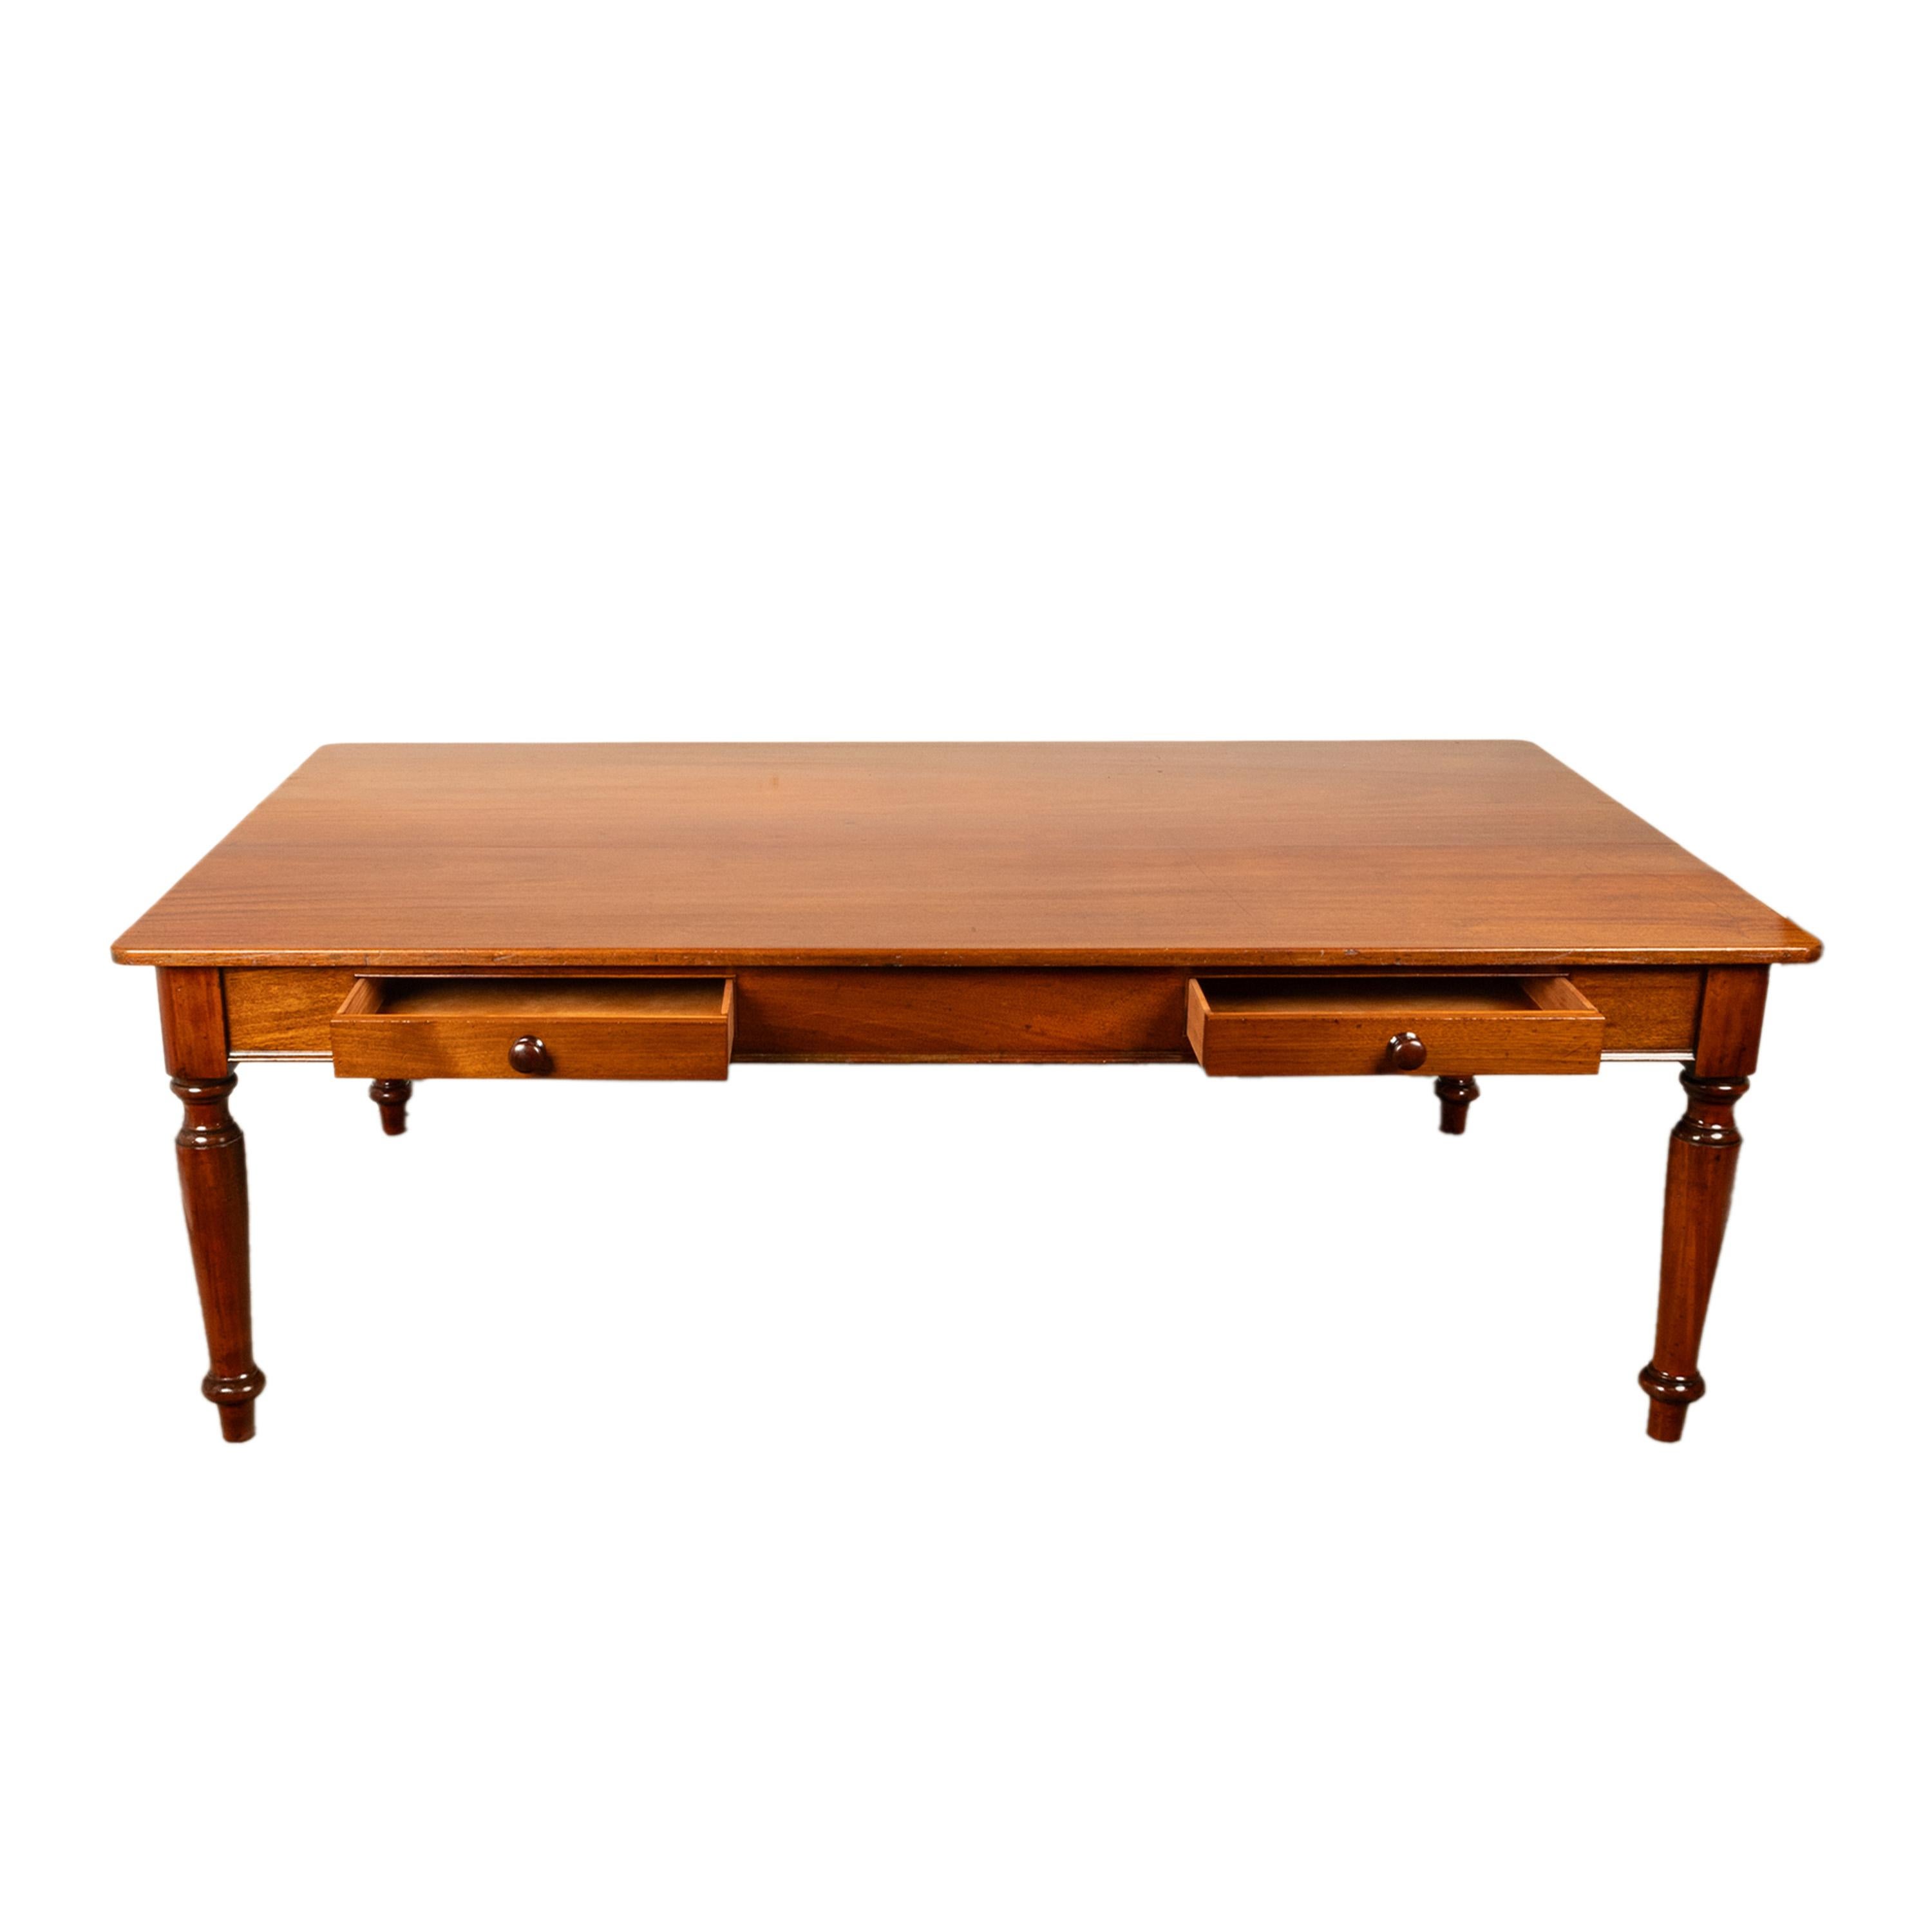 Antique Monumental 19th Century Mahogany Library Conference Dining Table 1860 For Sale 2